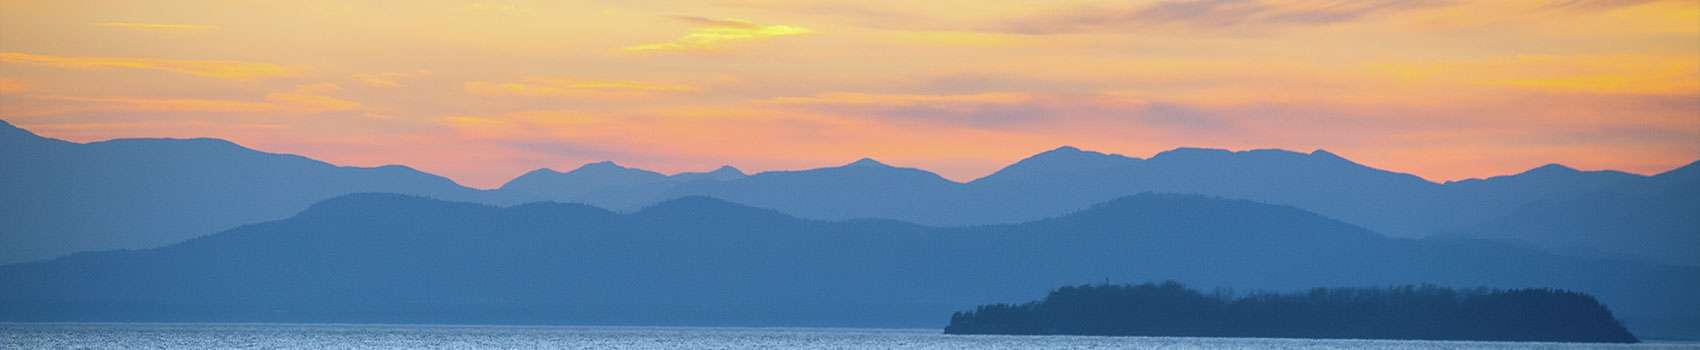 Sunset over Mountains and Lake Champlain with Islands visible